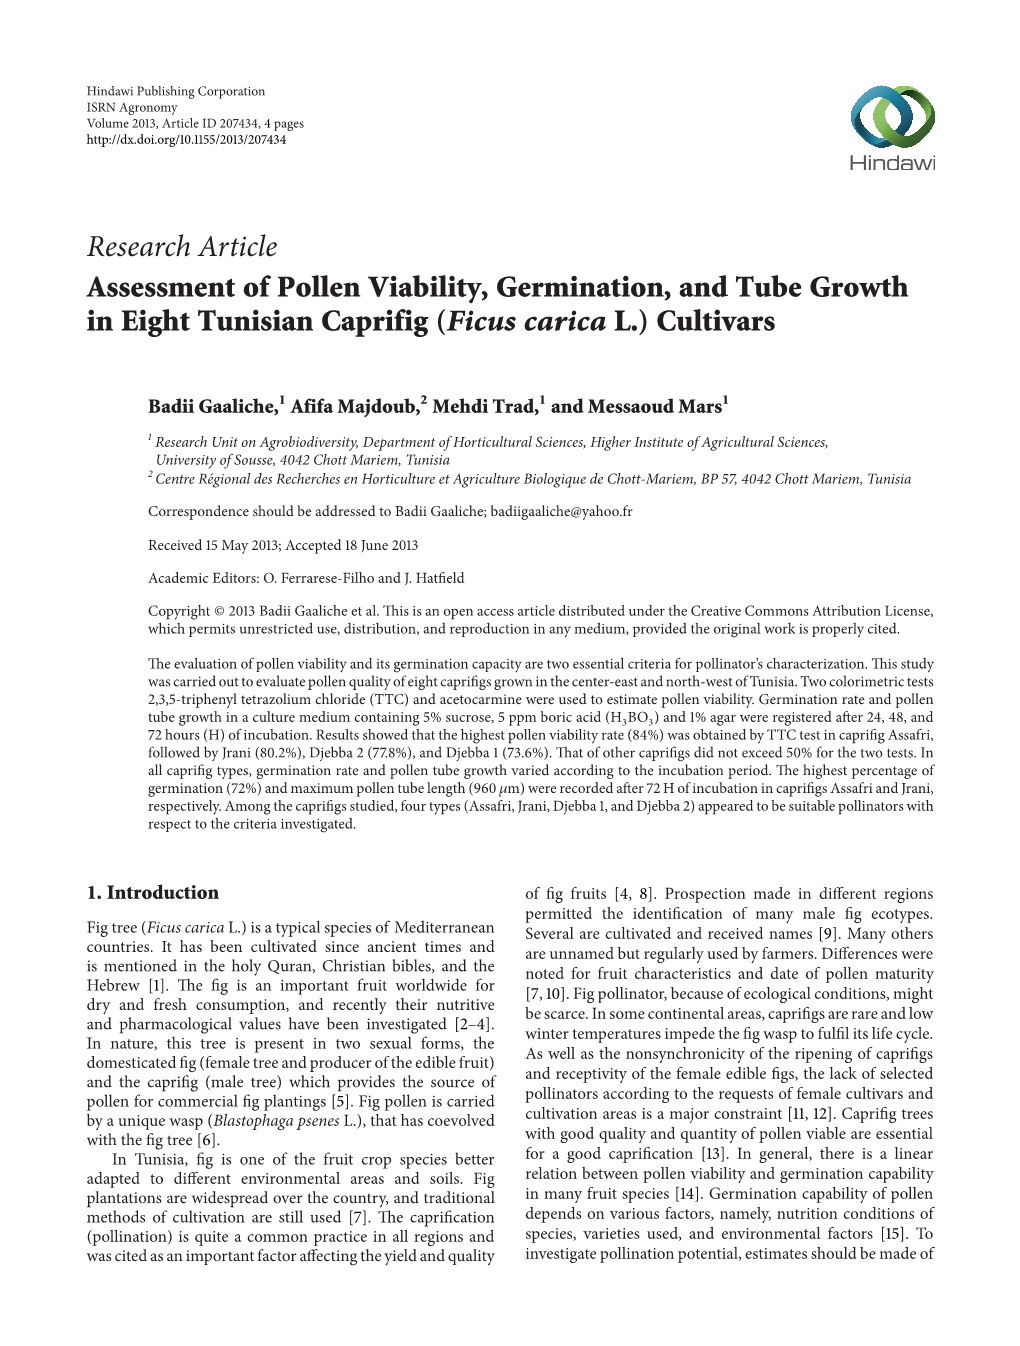 Assessment of Pollen Viability, Germination, and Tube Growth in Eight Tunisian Caprifig (Ficus Carica L.) Cultivars